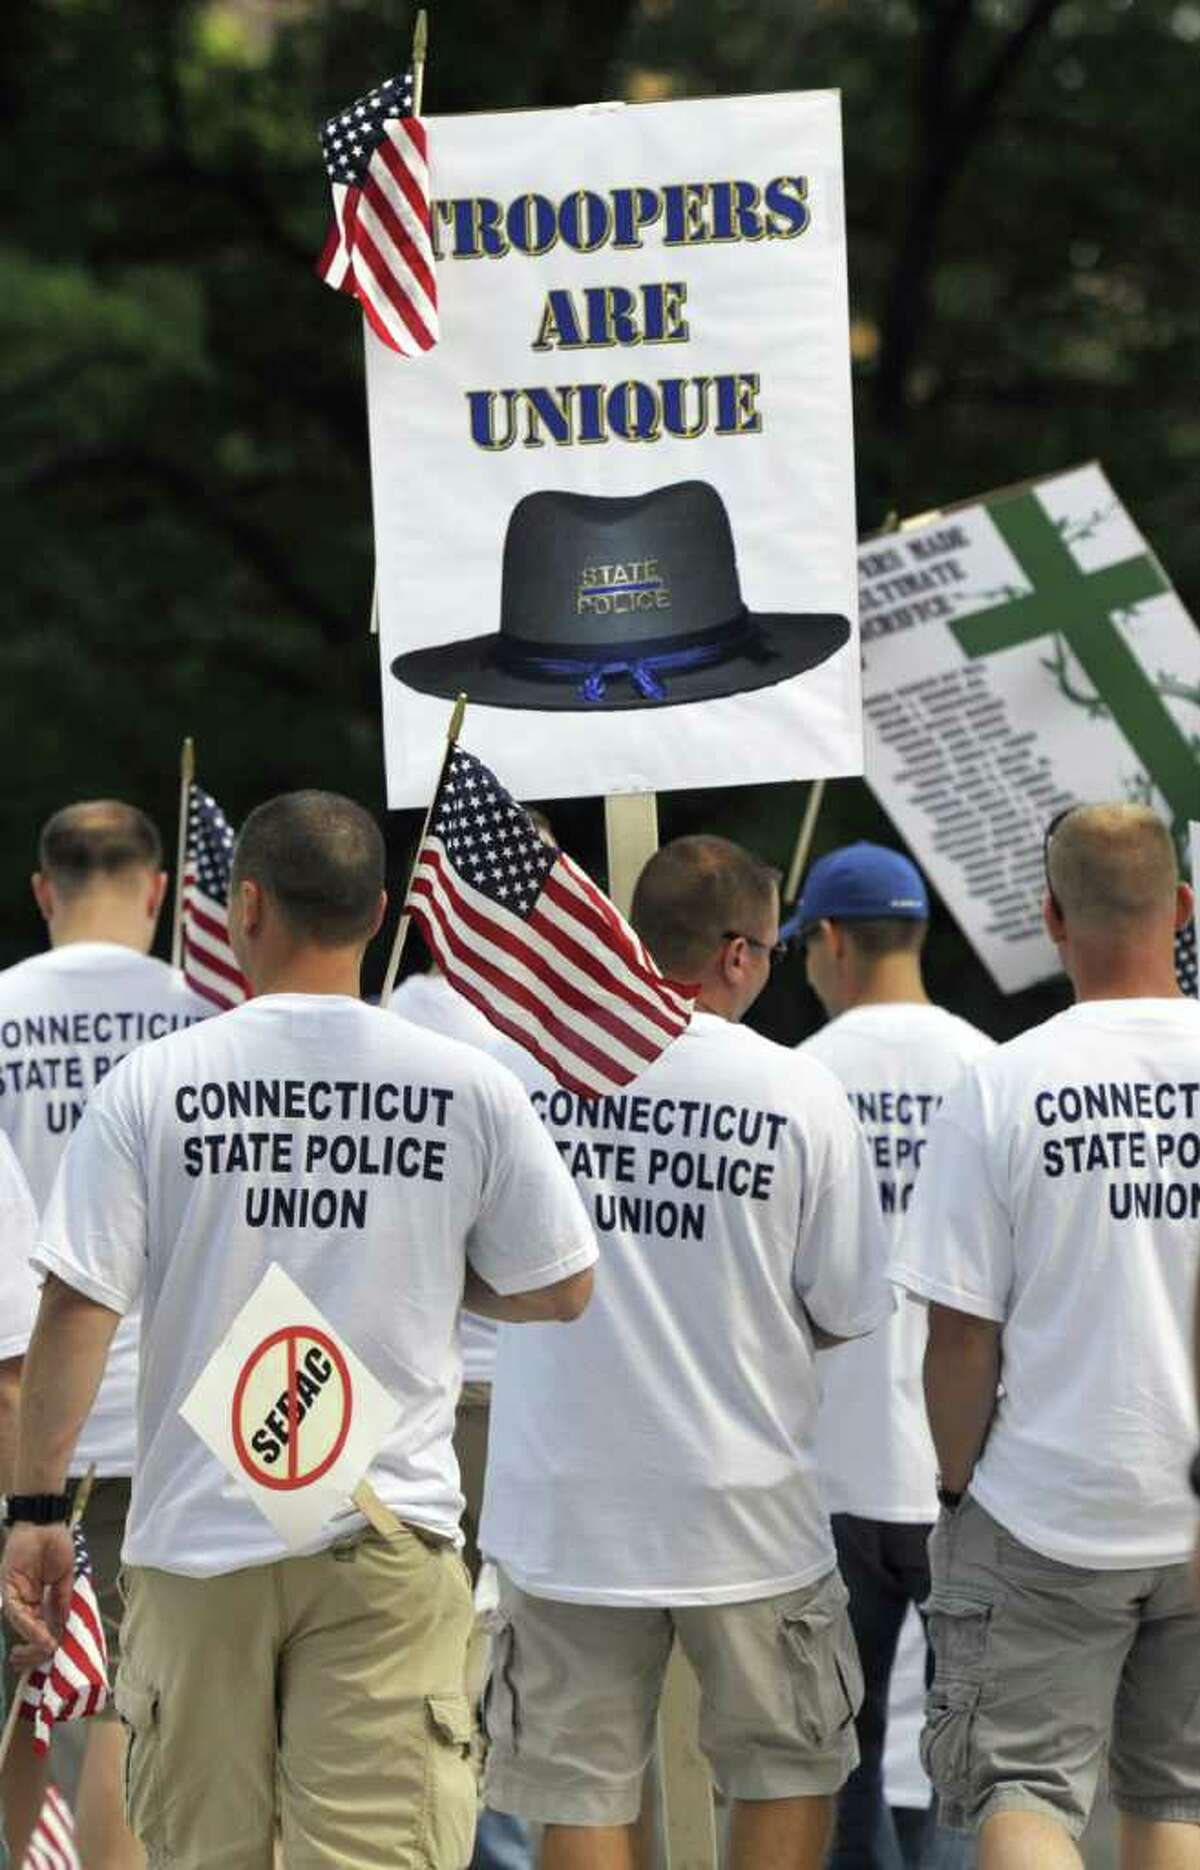 The Connecticut State Police Union holds a rally at the Capitol in Hartford, Conn., Monday, Aug. 22, 2011. Union leaders say state police are already understaffed and cutting 56 troopers is a dangerous proposal that could result in slower emergency response times. (AP Photo/Jessica Hill)